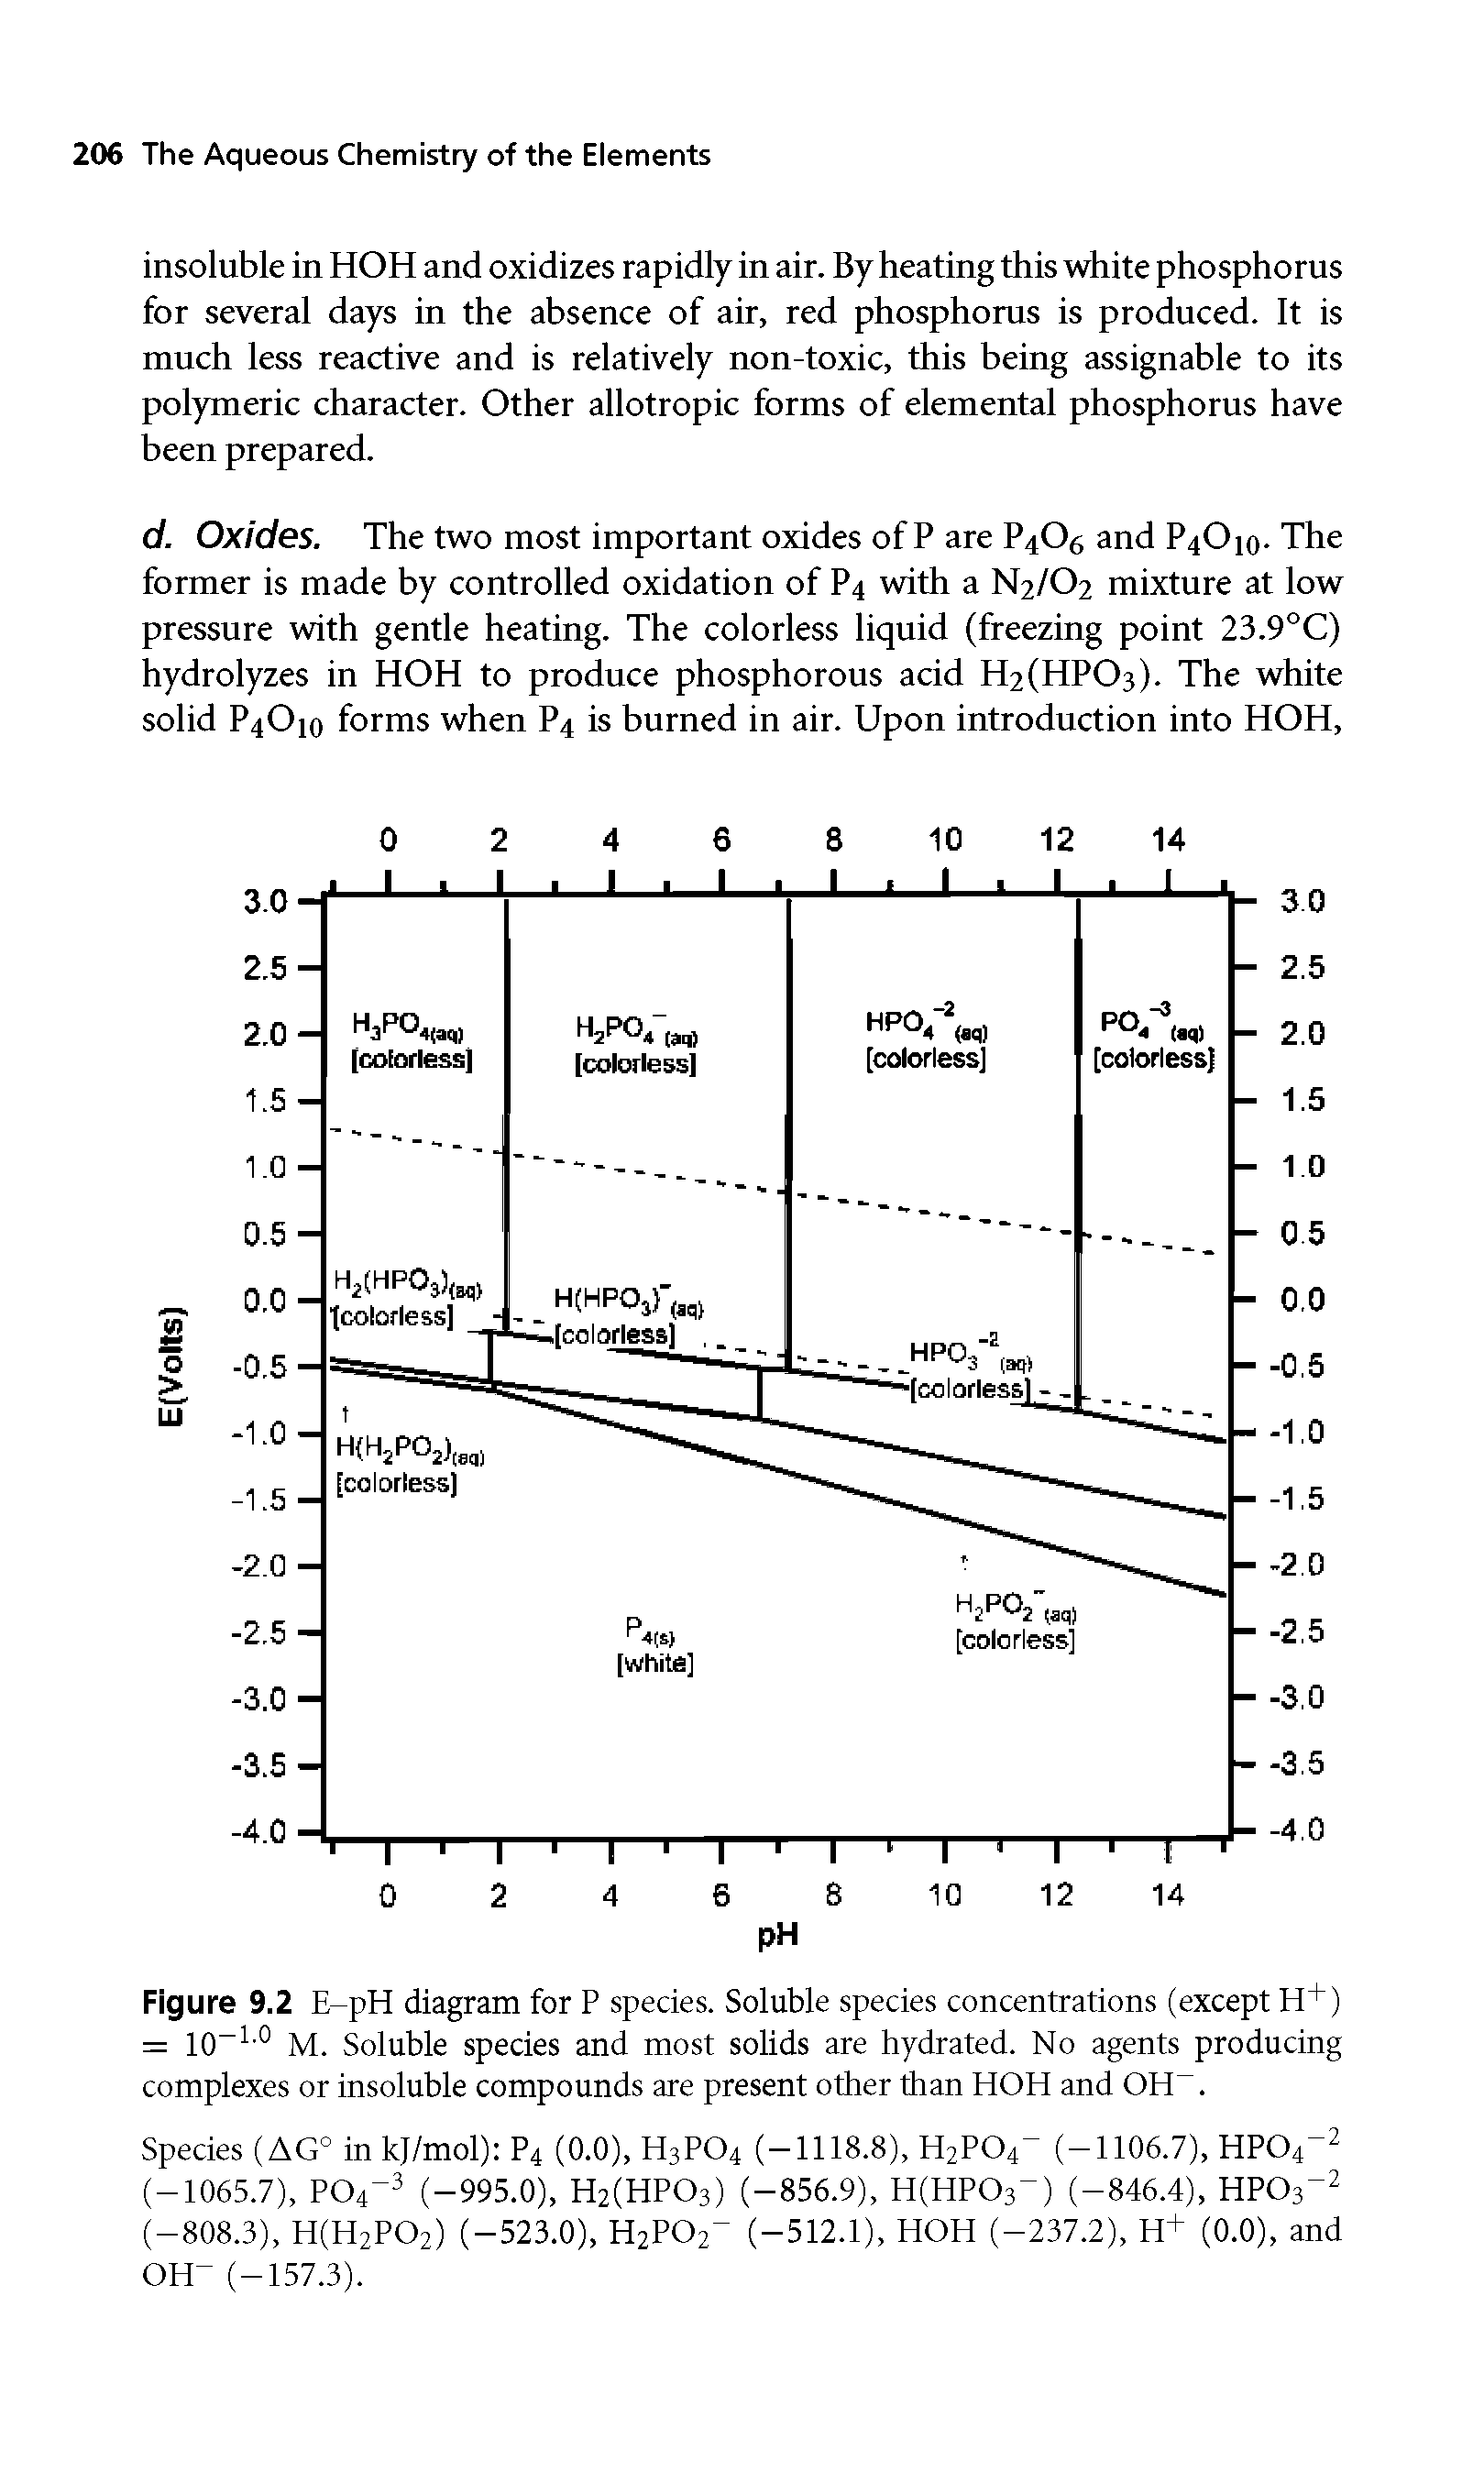 Figure 9.2 E-pH diagram for P species. Soluble species concentrations (except H+) = 10 -° M. Soluble species and most solids are hydrated. No agents producing complexes or insoluble compounds are present other than HOH and OH. ...